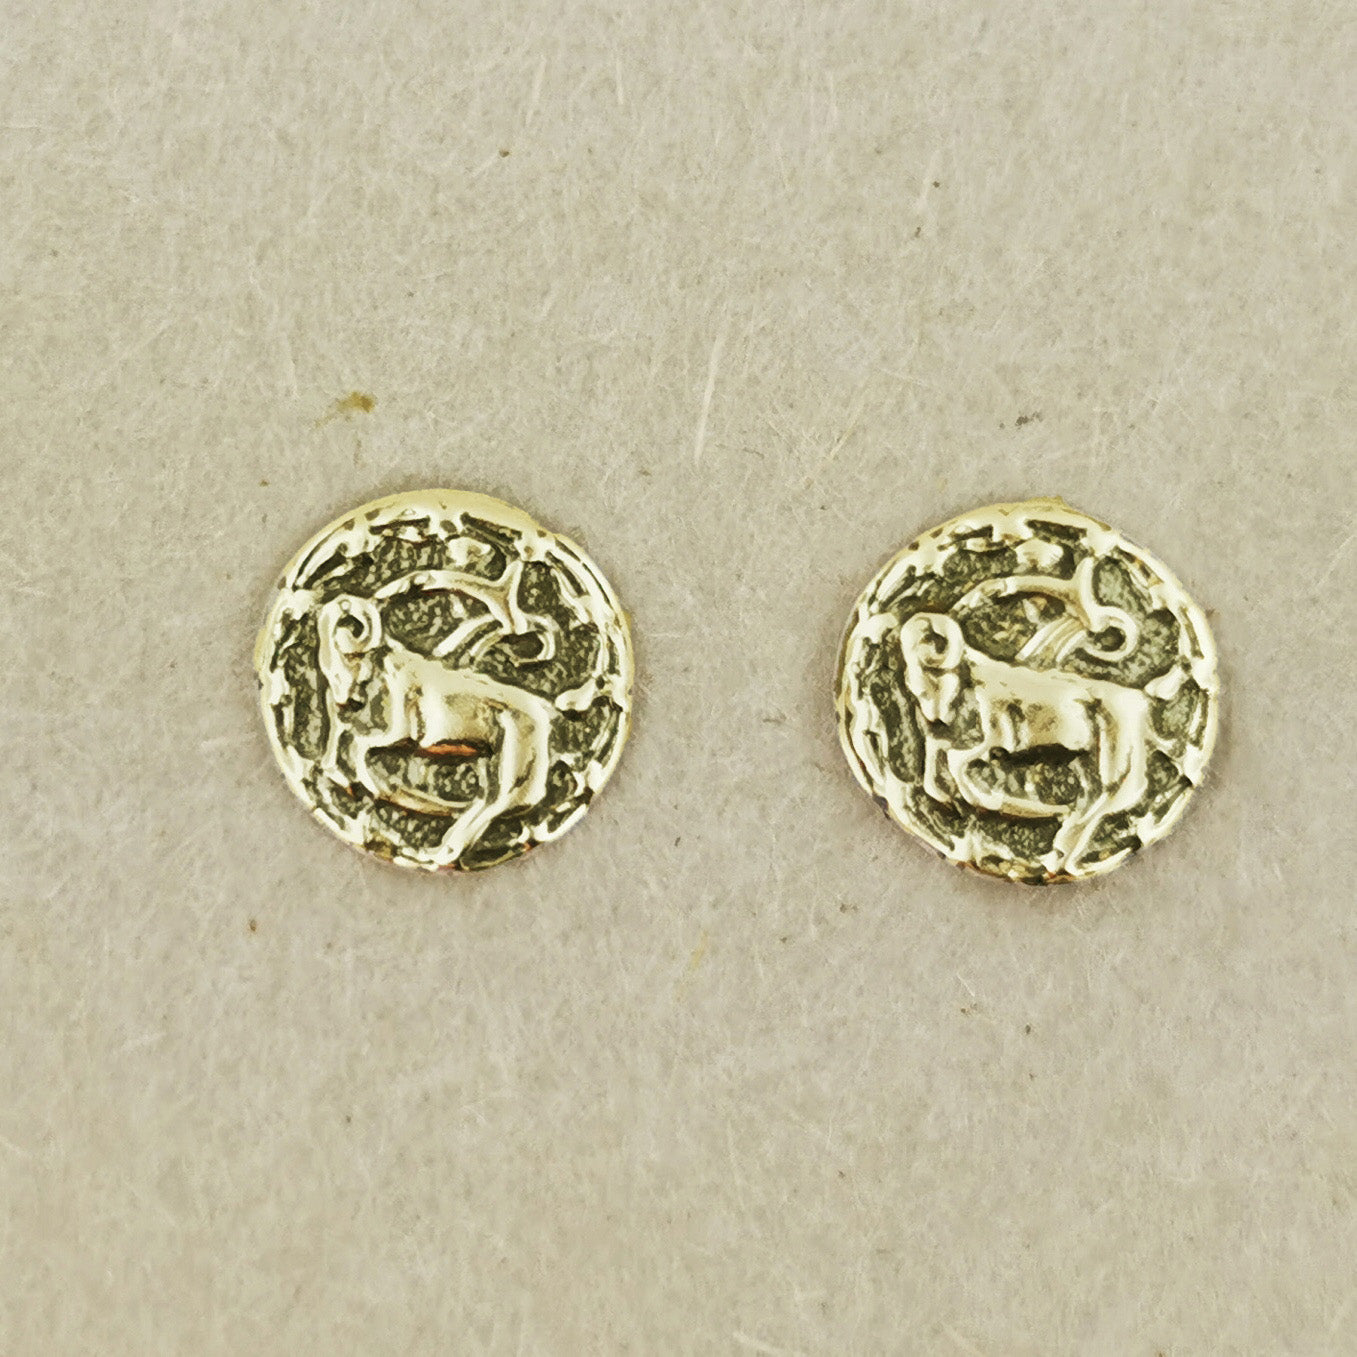 Gold Zodiac Stud Earrings Made to Order, Gold Zodiac Studs, Gold Zodiac Stud Earrings, Gold Zodiac Earrings, Zodiac Earrings In Gold, Gold Astrology Jewelry, Gold Astrology Jewellery, Star Chart Earrings, Gold Stud Earrings, Retro Style Gold Jewelry, Retro Gold Jewellery, Retro Gold Jewelry, Retro Gold Earrings, Birthsign Gold Earrings, Vintage Style Earrings, 1950s Style Earrings, Zodiac Sign Gift, Zodiac Sign Jewellery, Zodiac Sign Jewelry